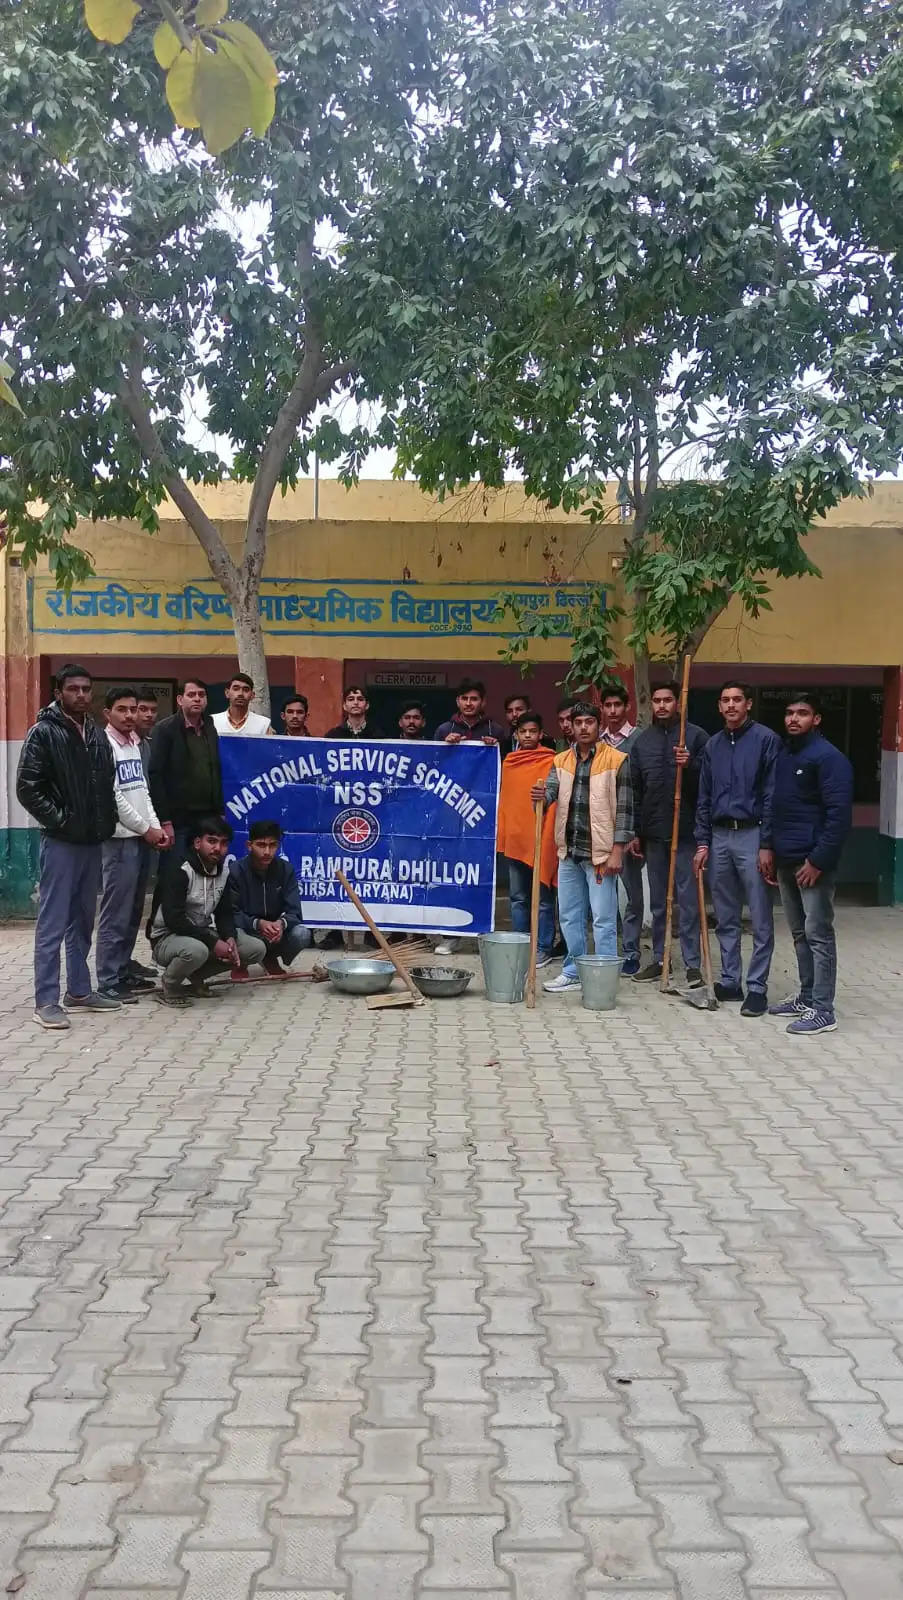 Cleaning campaign conducted in the school premises for the second day in Government Senior Secondary School, Rampura Dhillon.